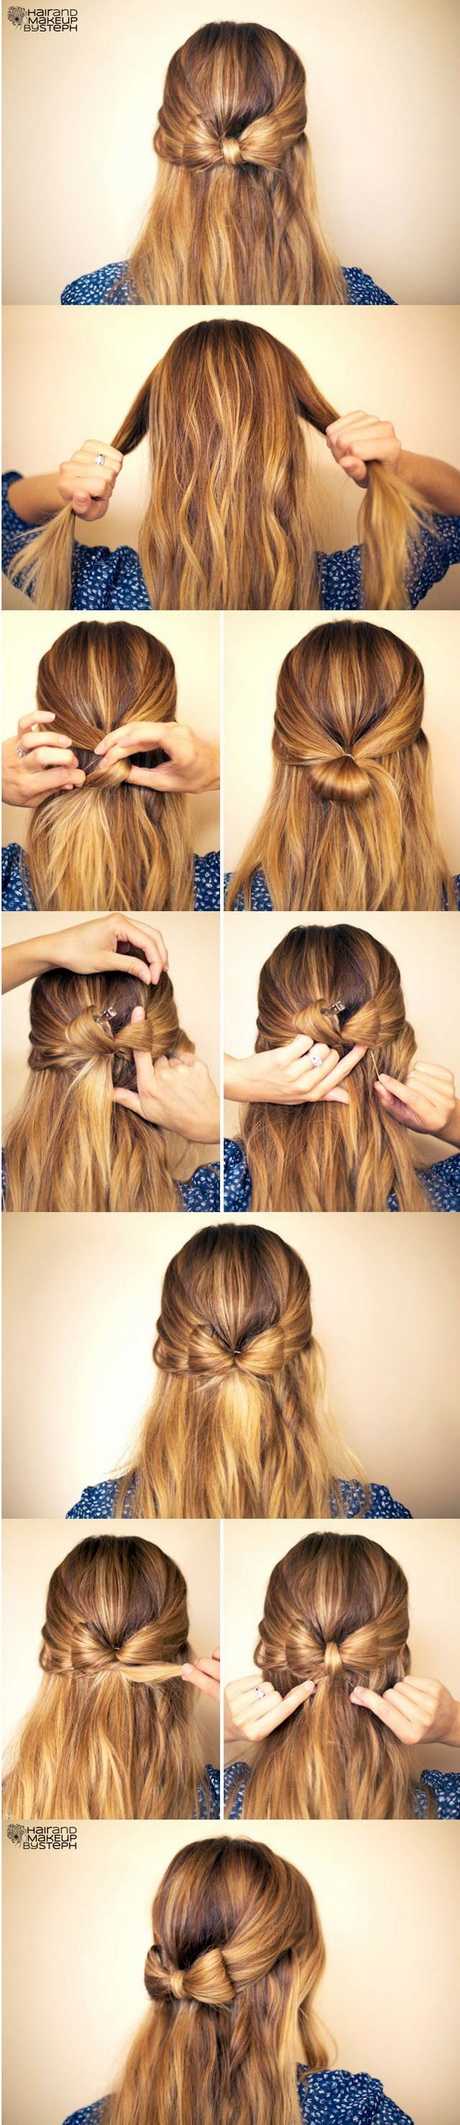 Easy pretty hairstyles for long hair easy-pretty-hairstyles-for-long-hair-94-17